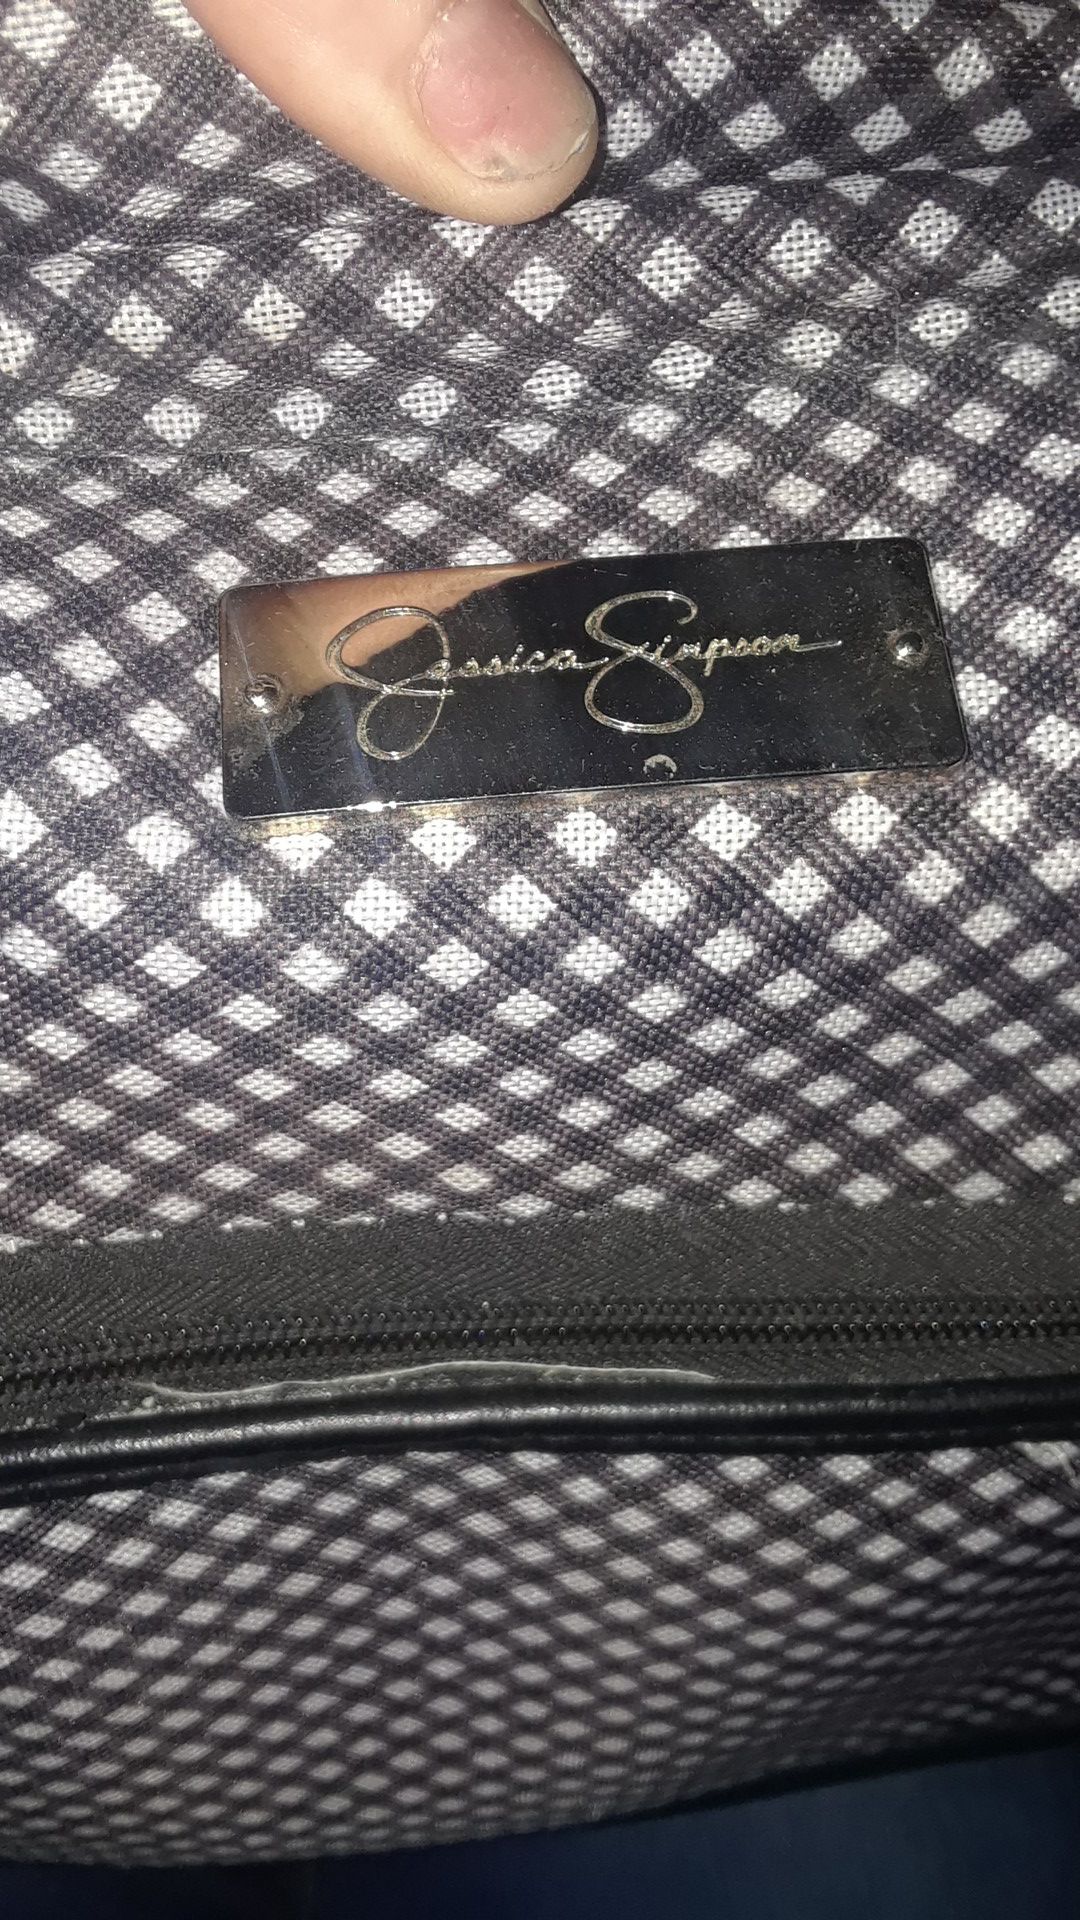 Jessica Simpson Luggage 20” Rolling Duffel Bag Black and white gingham NWT